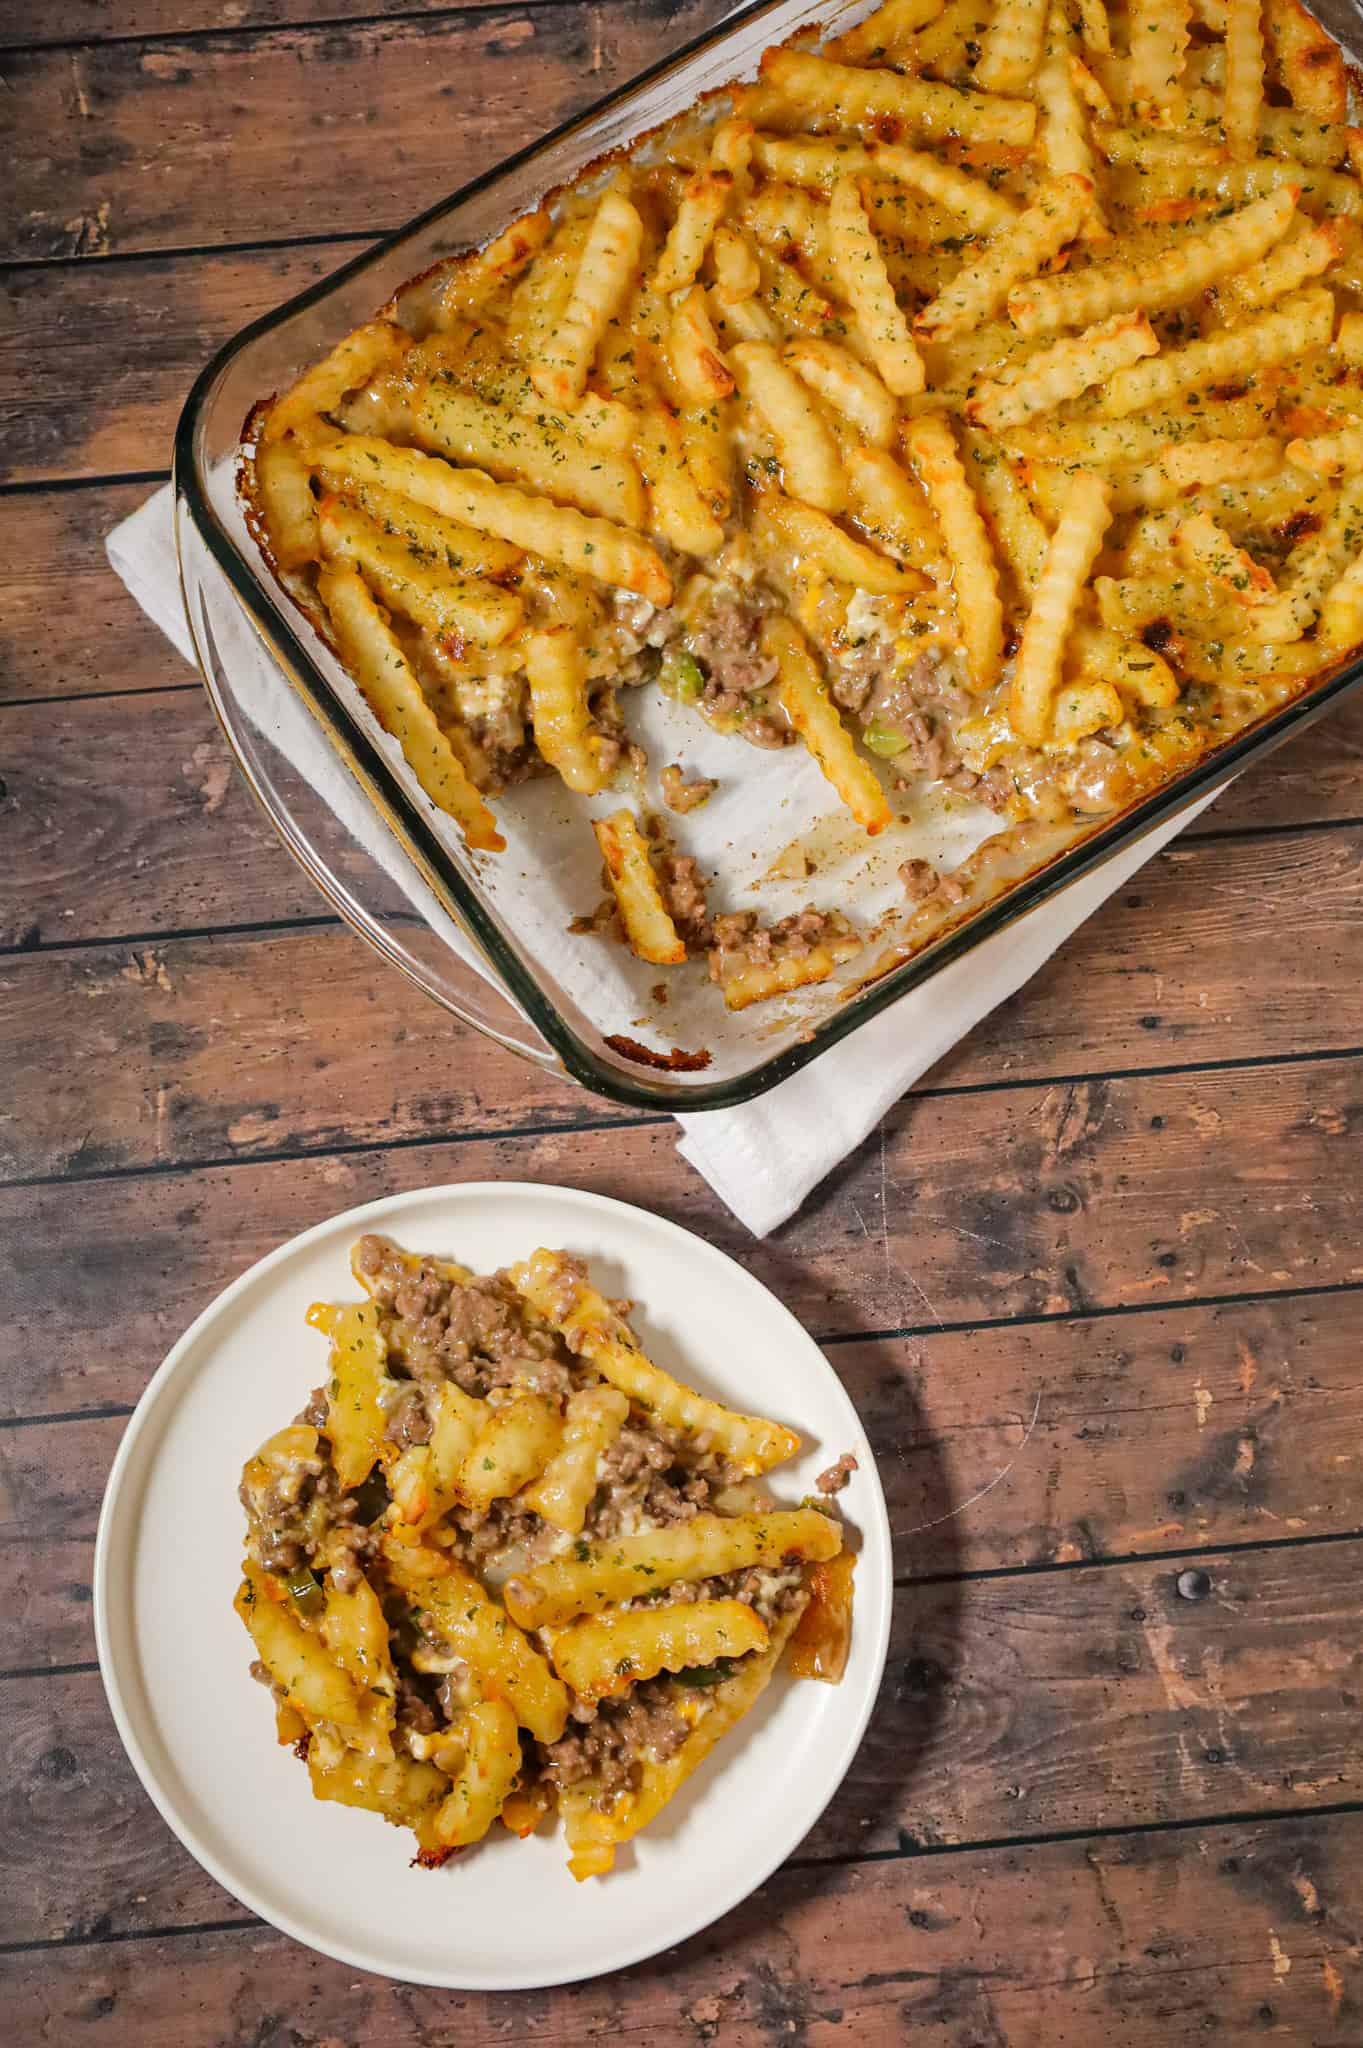 French Fry Casserole is a hearty ground beef casserole made with cream of mushroom soup, cheddar soup, diced onions, green peppers and shredded cheese all topped with crinkle cut fries.